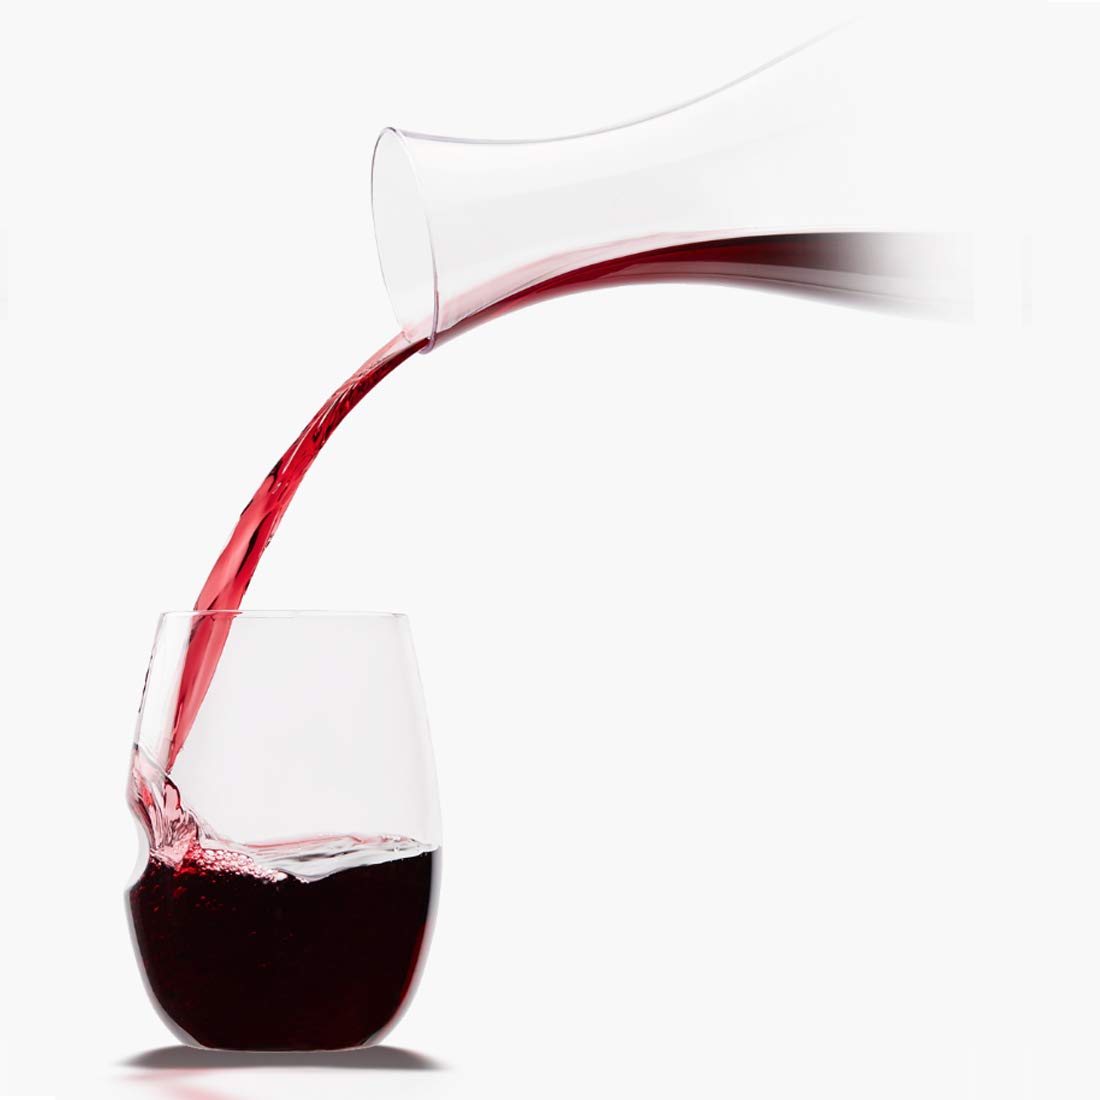 govino Go Anywhere Wine Glasses | Dishwasher Safe, Flexible, Shatterproof, and Recyclable | 16 oz. Each | Set of 4.